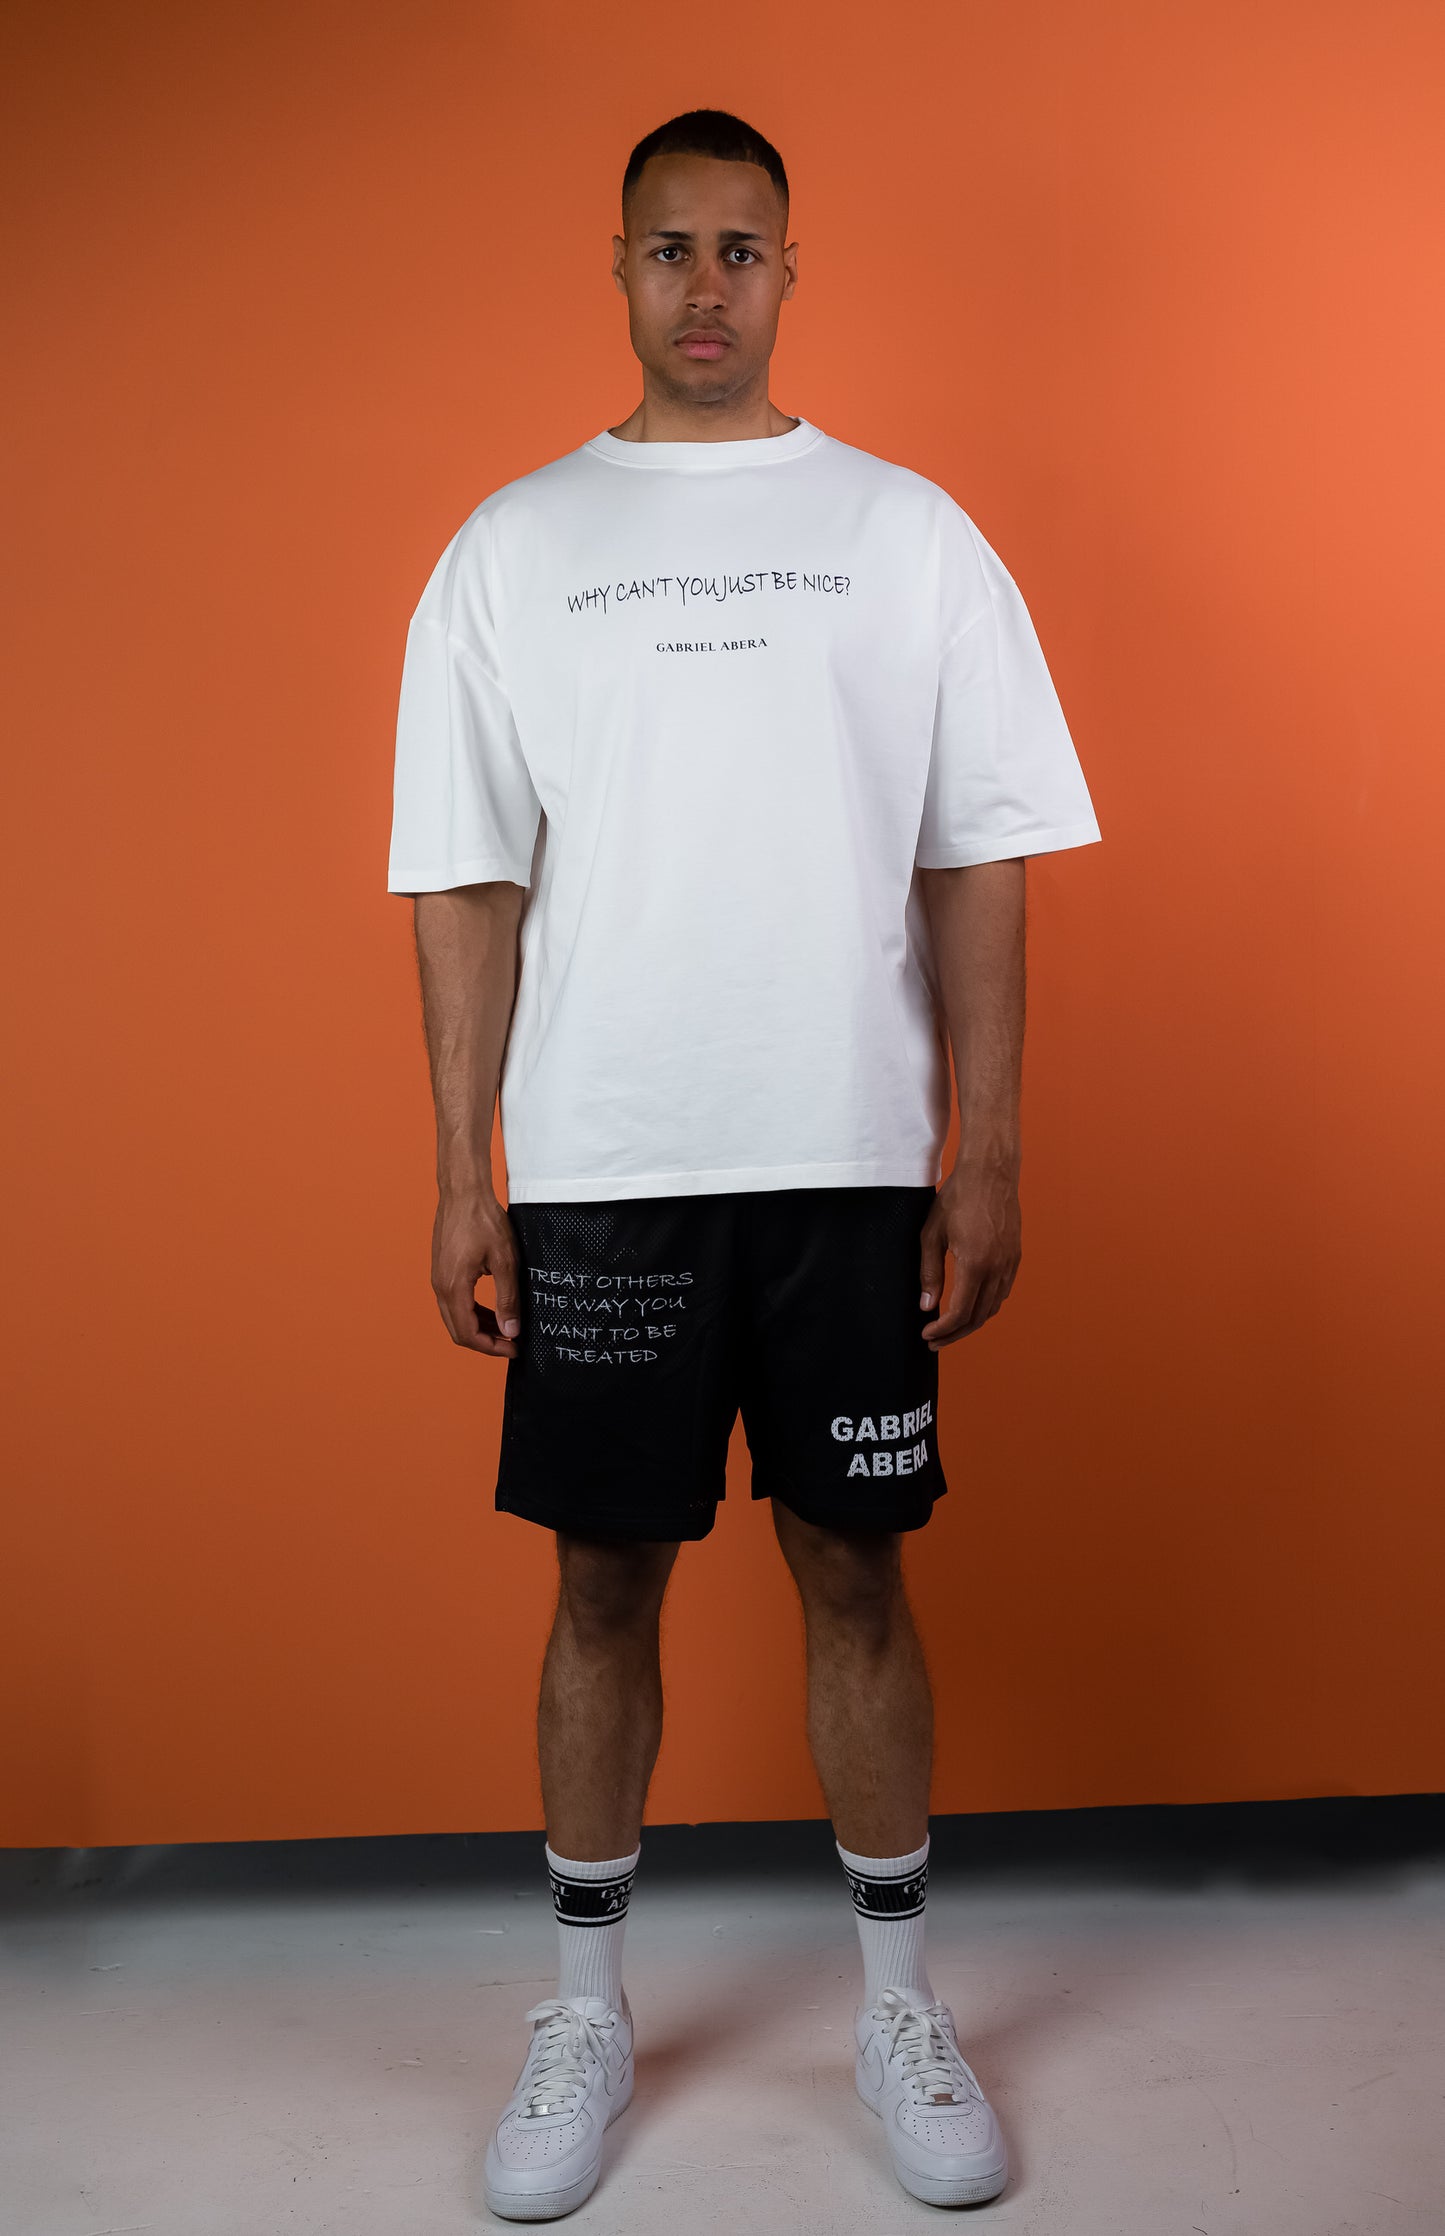 Male model wearing Black mesh shorts with statement print and brandname on the front